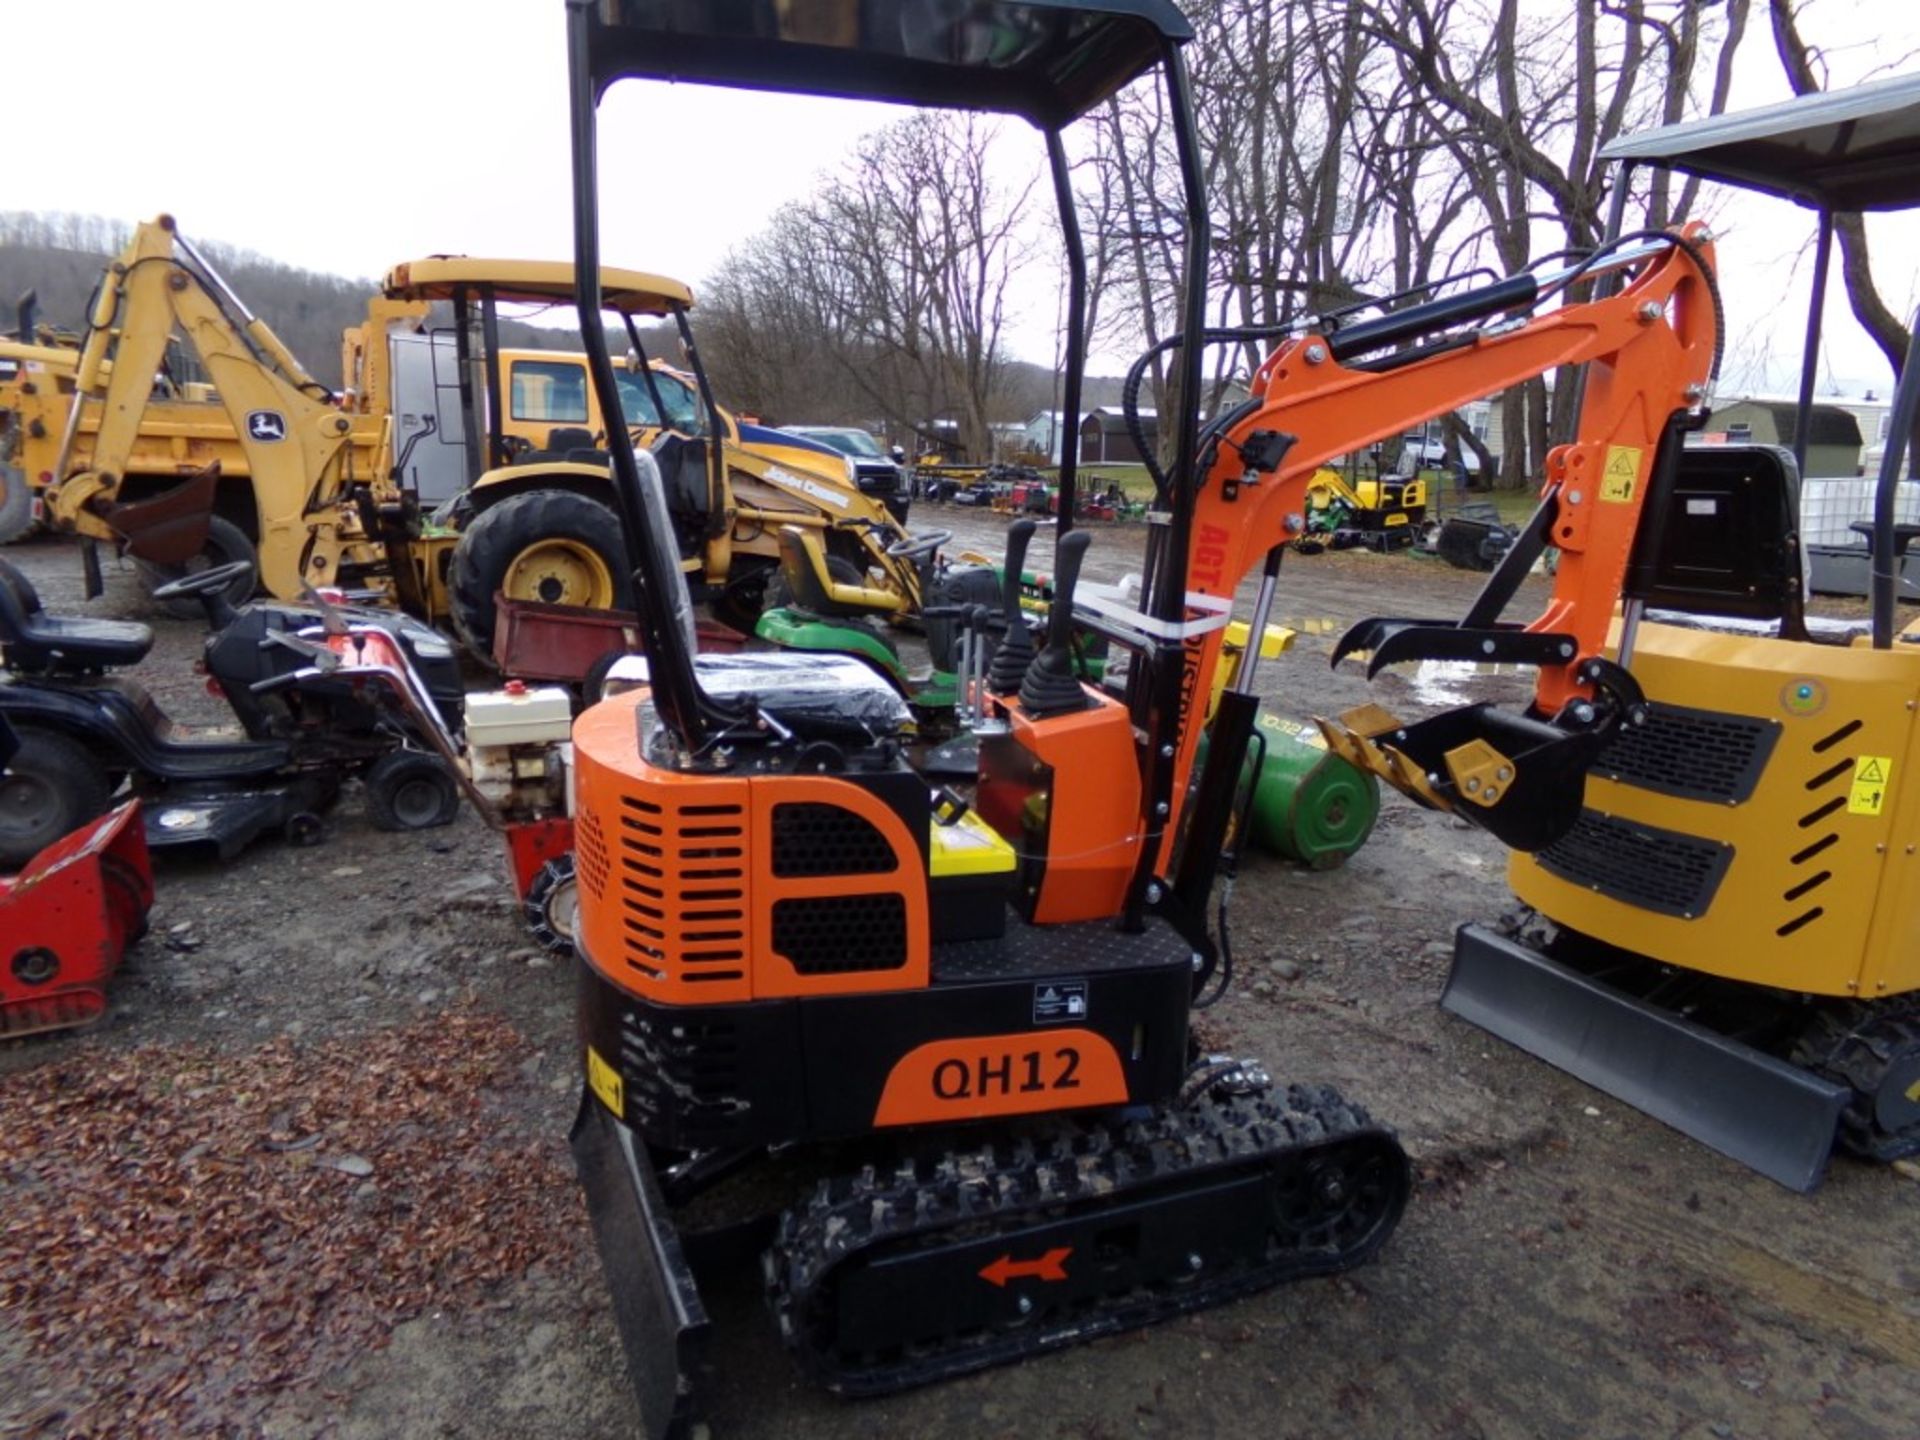 New AGT Industrial QH12 Mini Excavator with Grader Blade, Stationary Thumb, Briggs Gas Engine, - Image 3 of 8